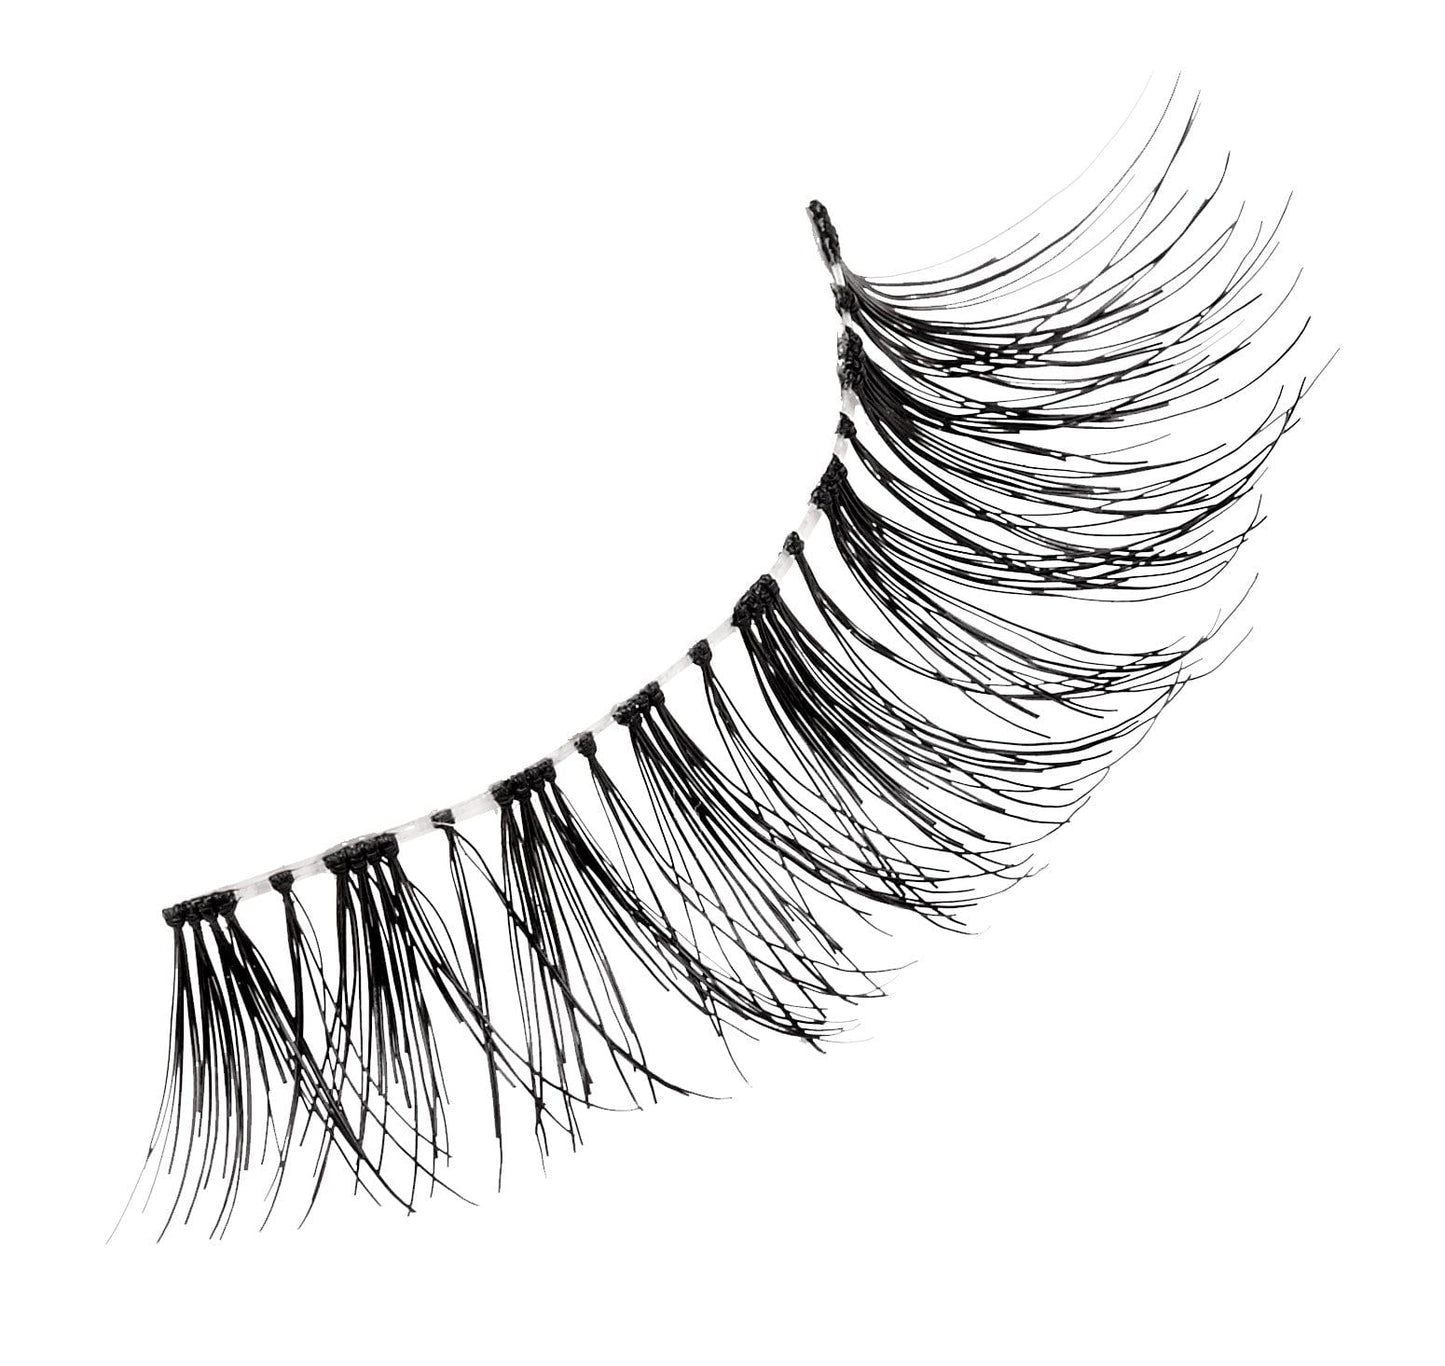 Kiss i-Envy Demi Wispies Feathery Style Strip Lashes